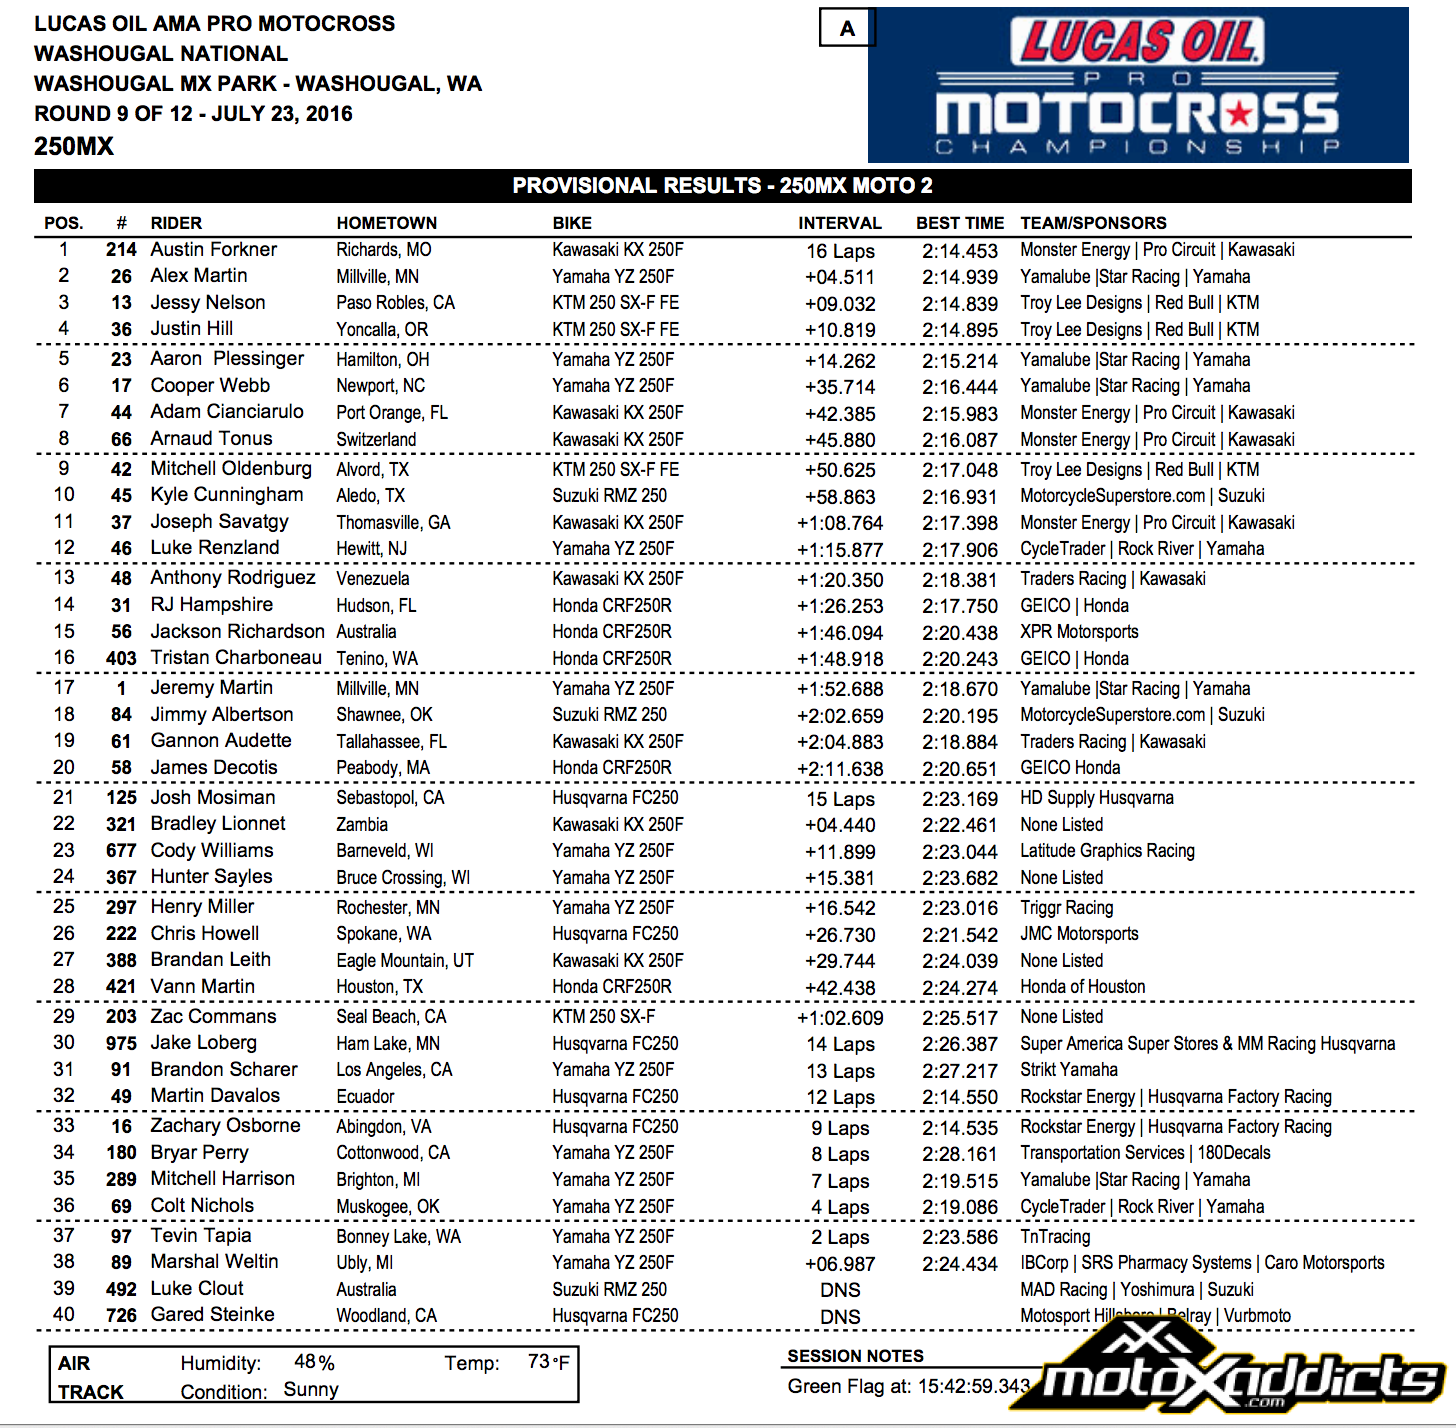 250MX Moto 2 Results - 2016 Washougal National - Click to Enlarge